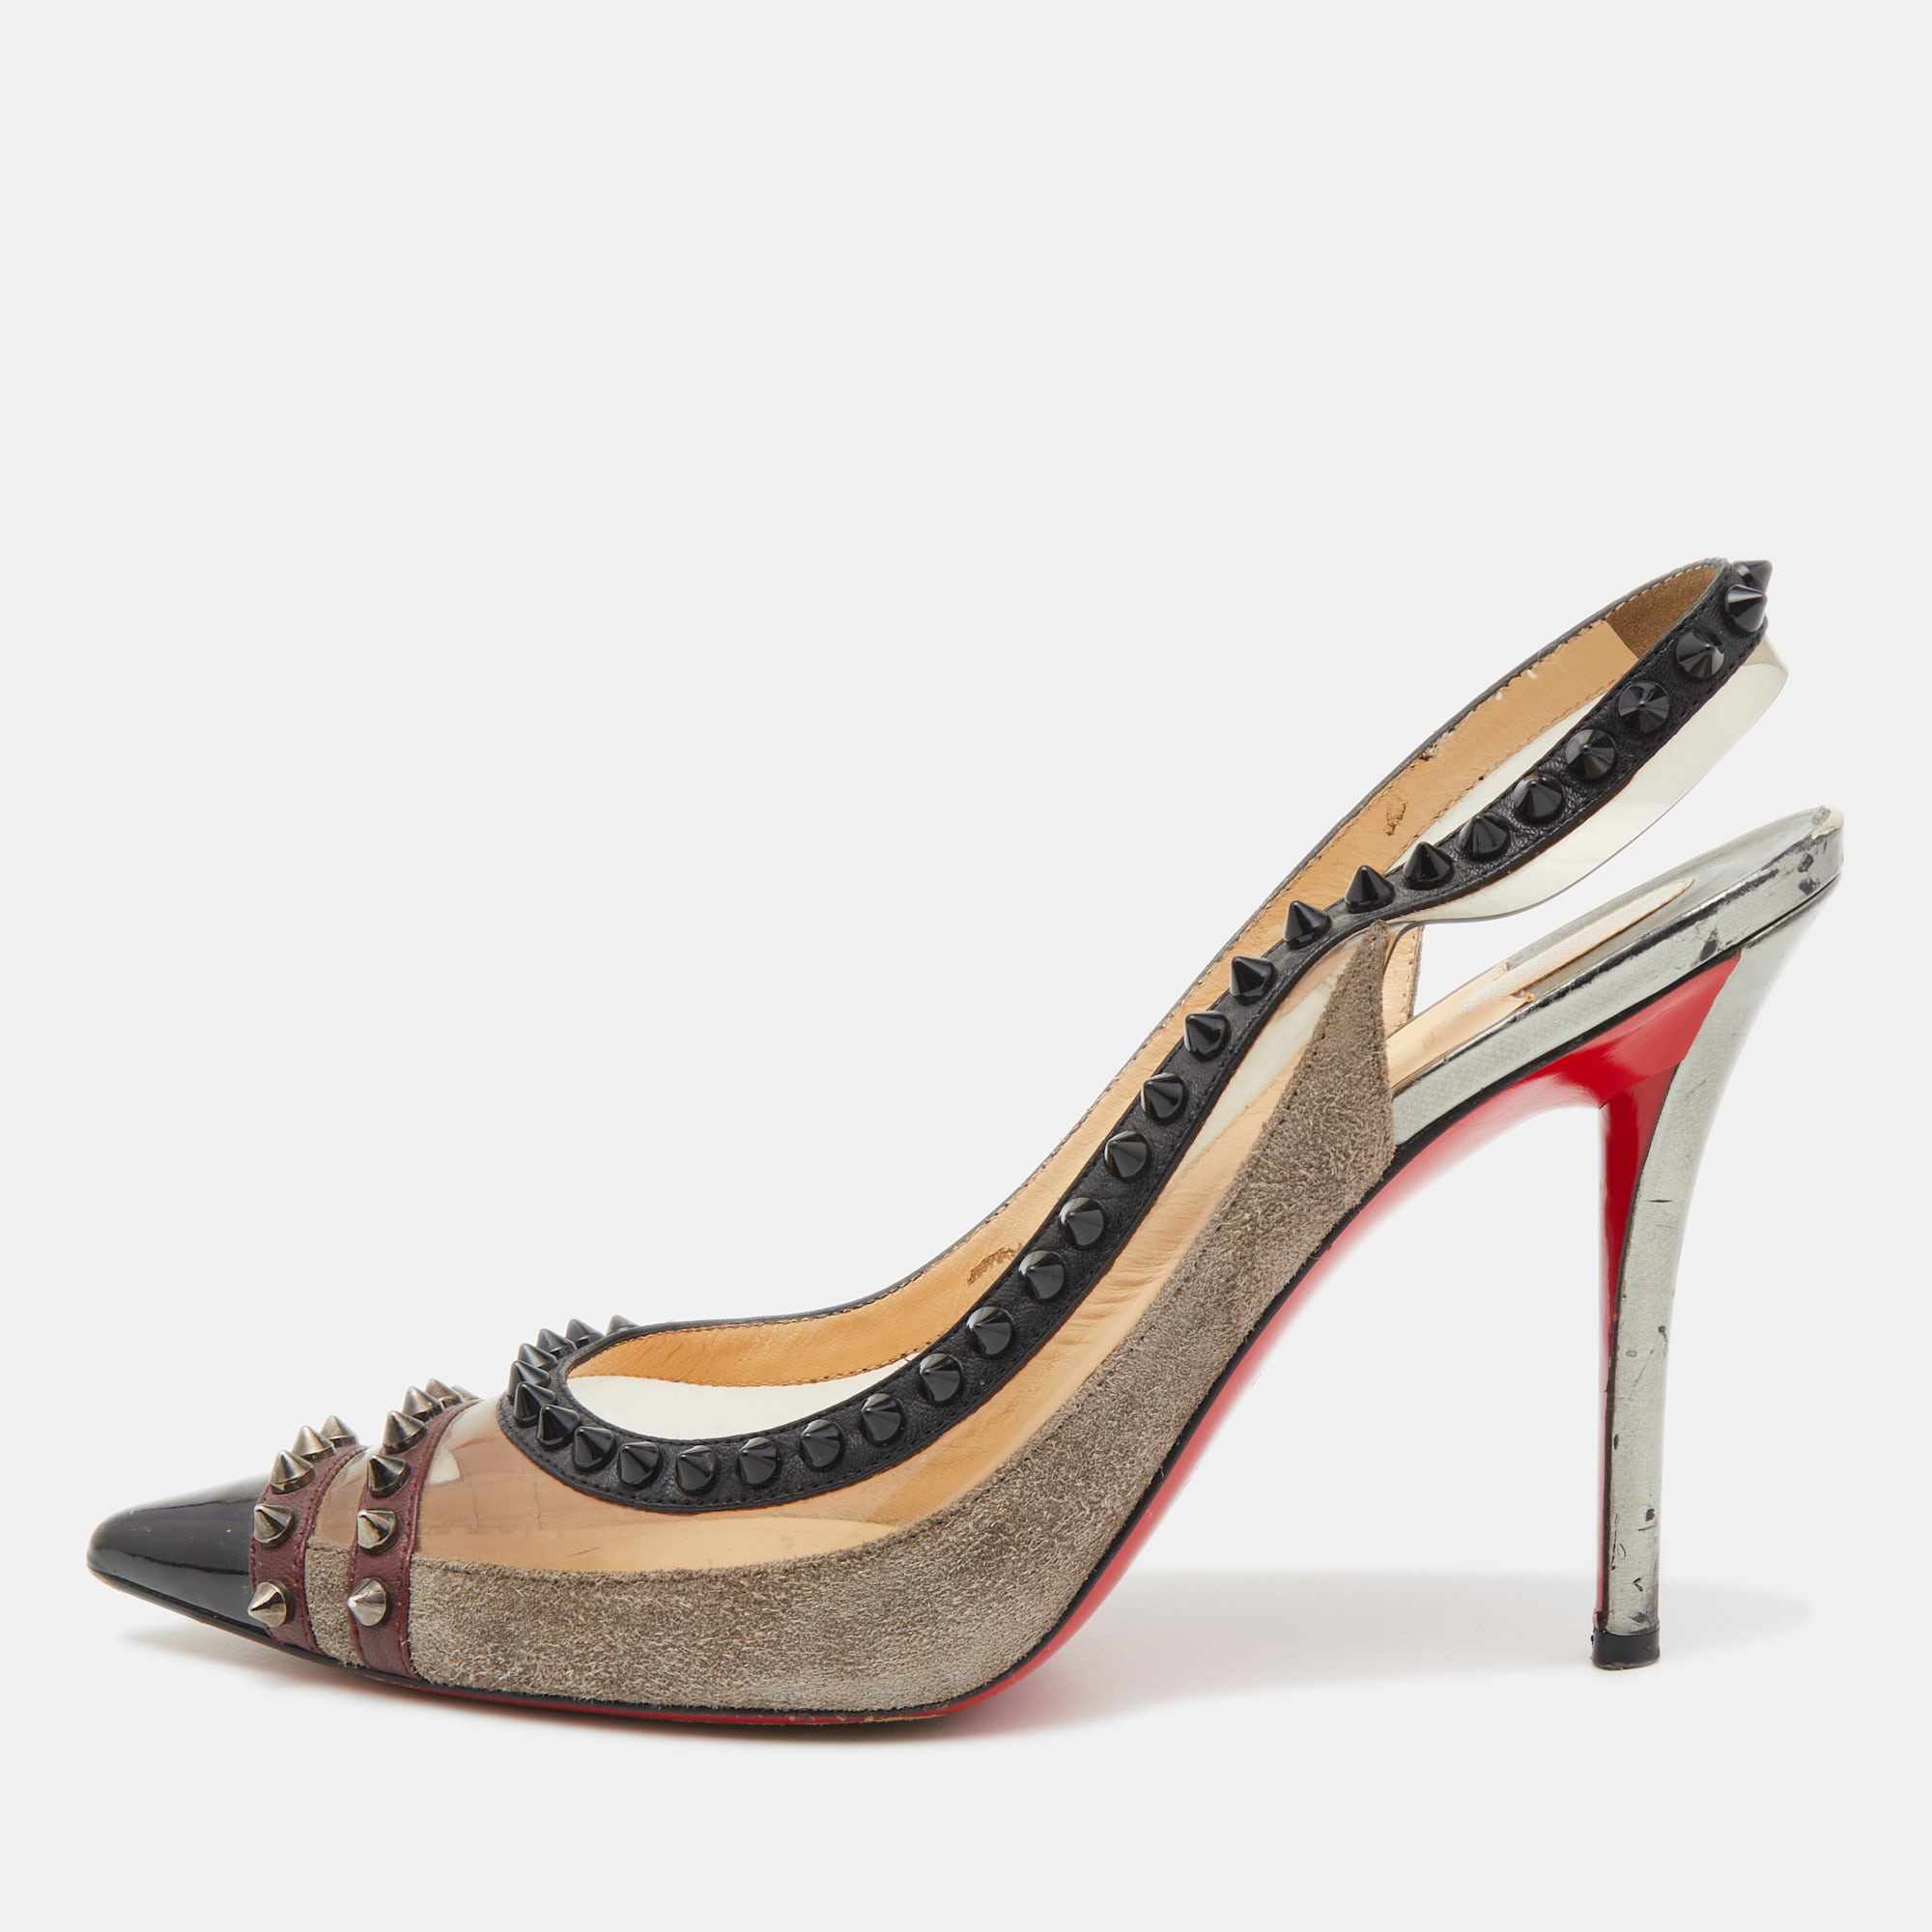 Pre-owned Christian Louboutin Multicolor Pvc And Suede Paulina Studded Slingback Pumps Size 39.5